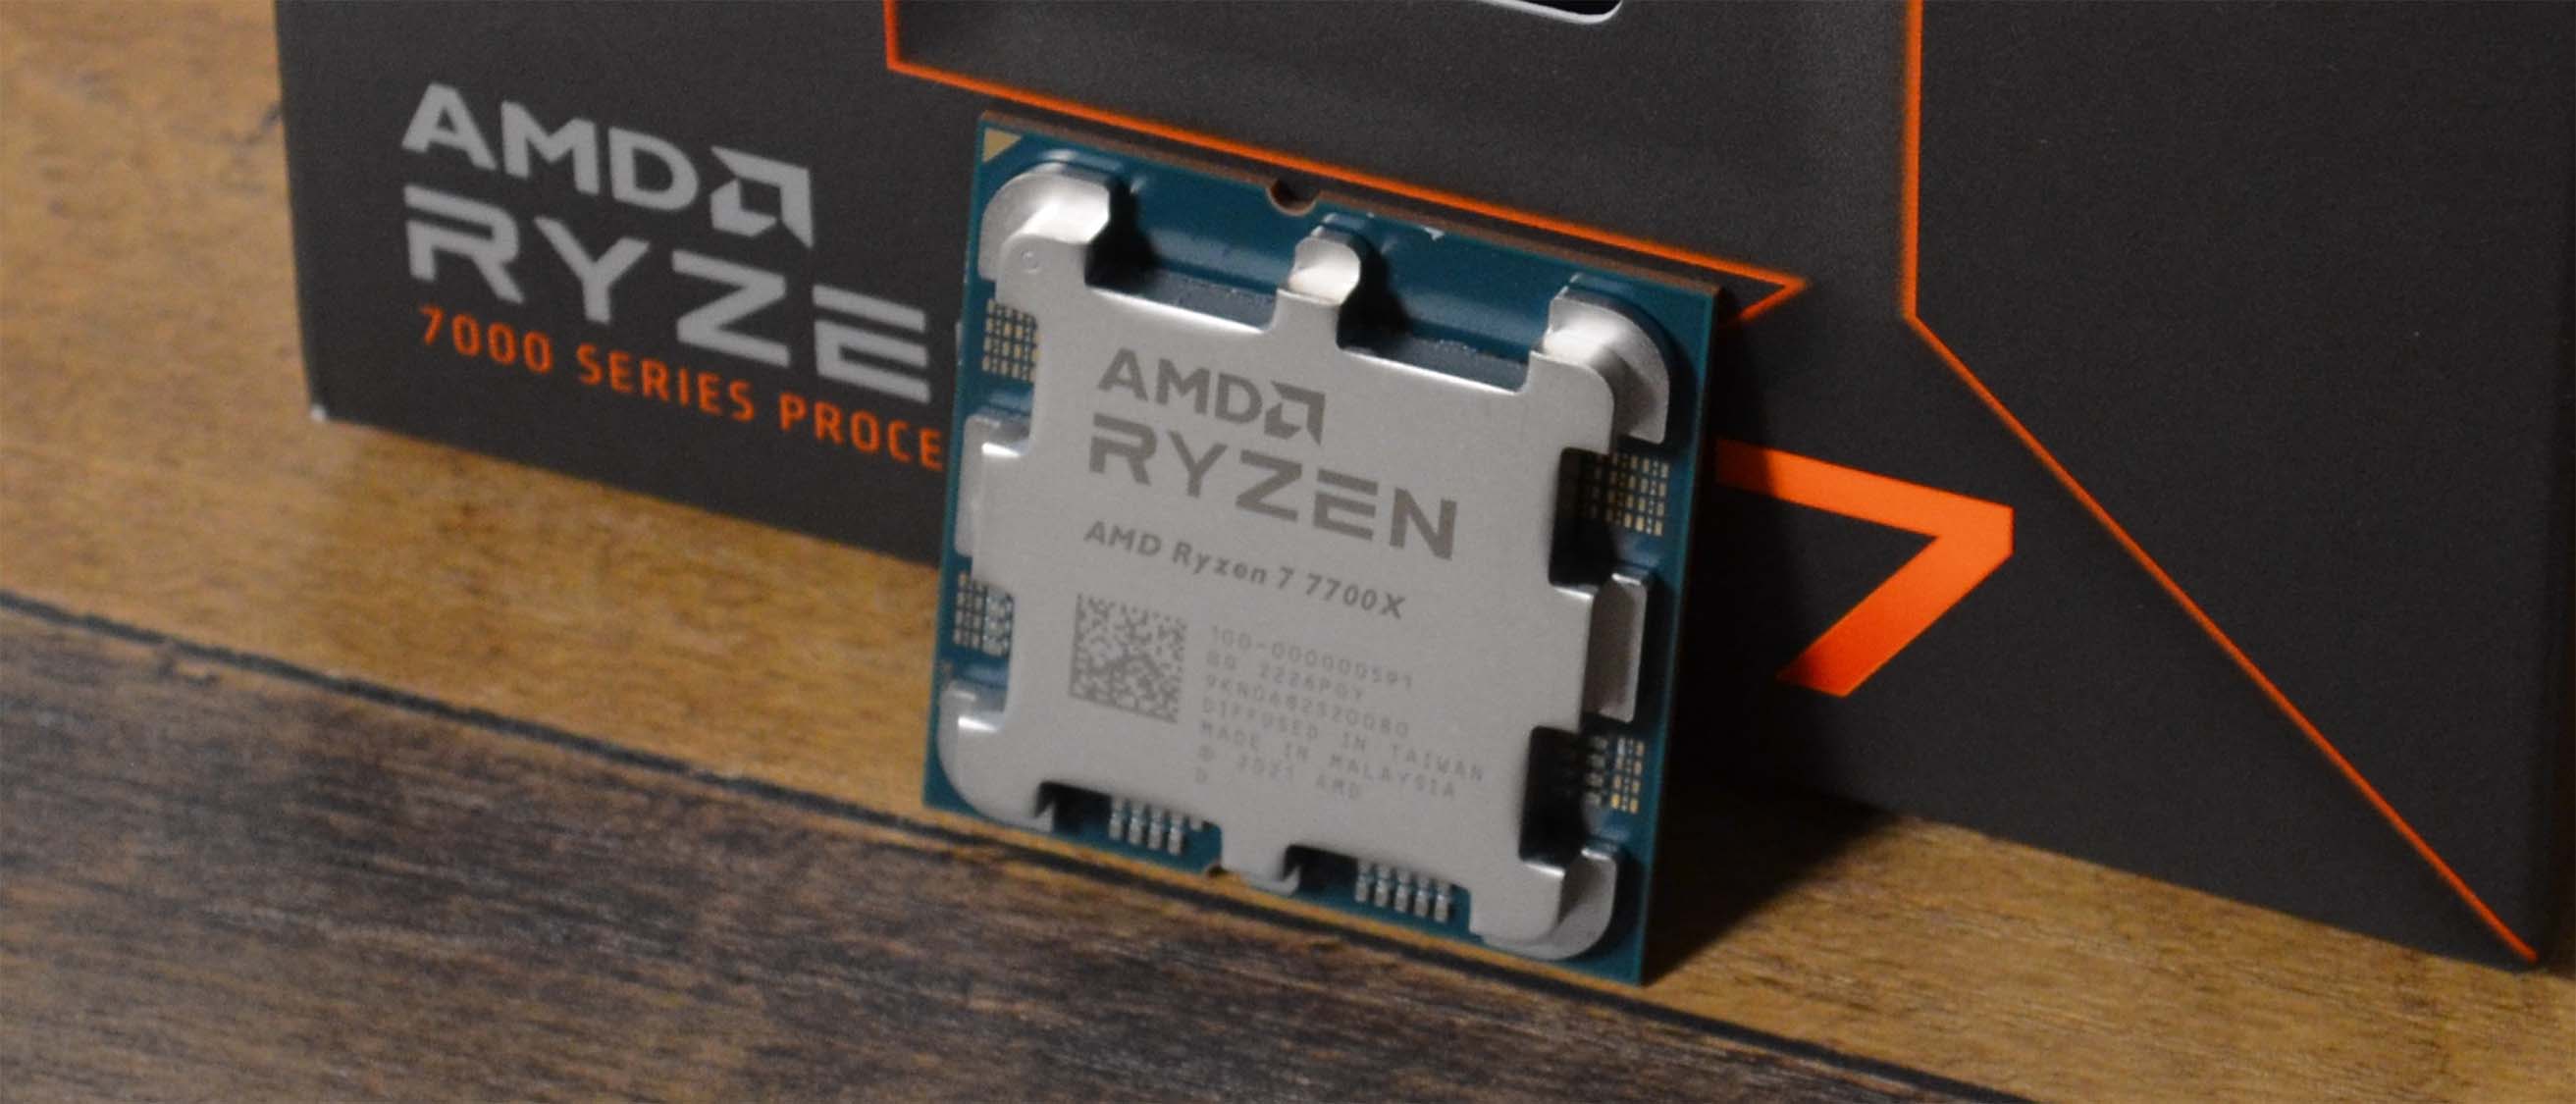 AMD Ryzen 7 7700X review: the best processor for most people